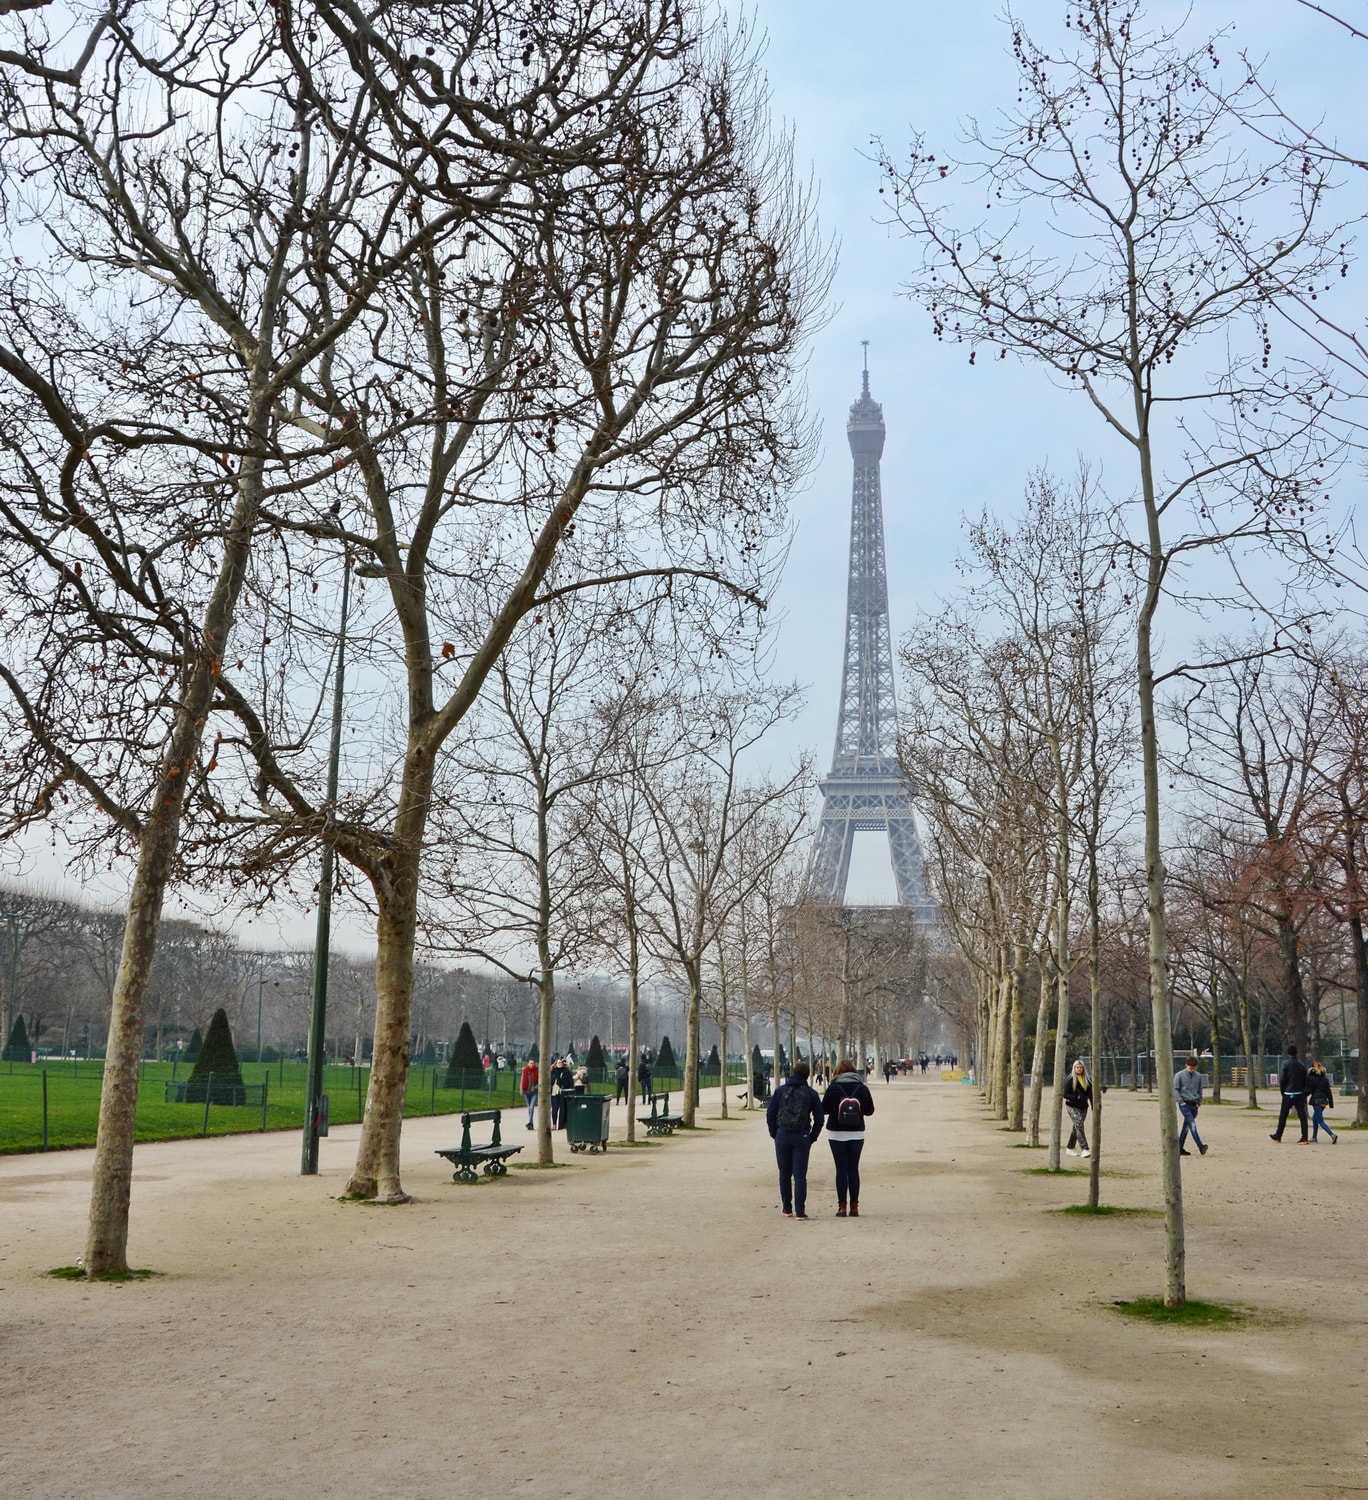 The Eiffel Tower, looking from Champ de Mars